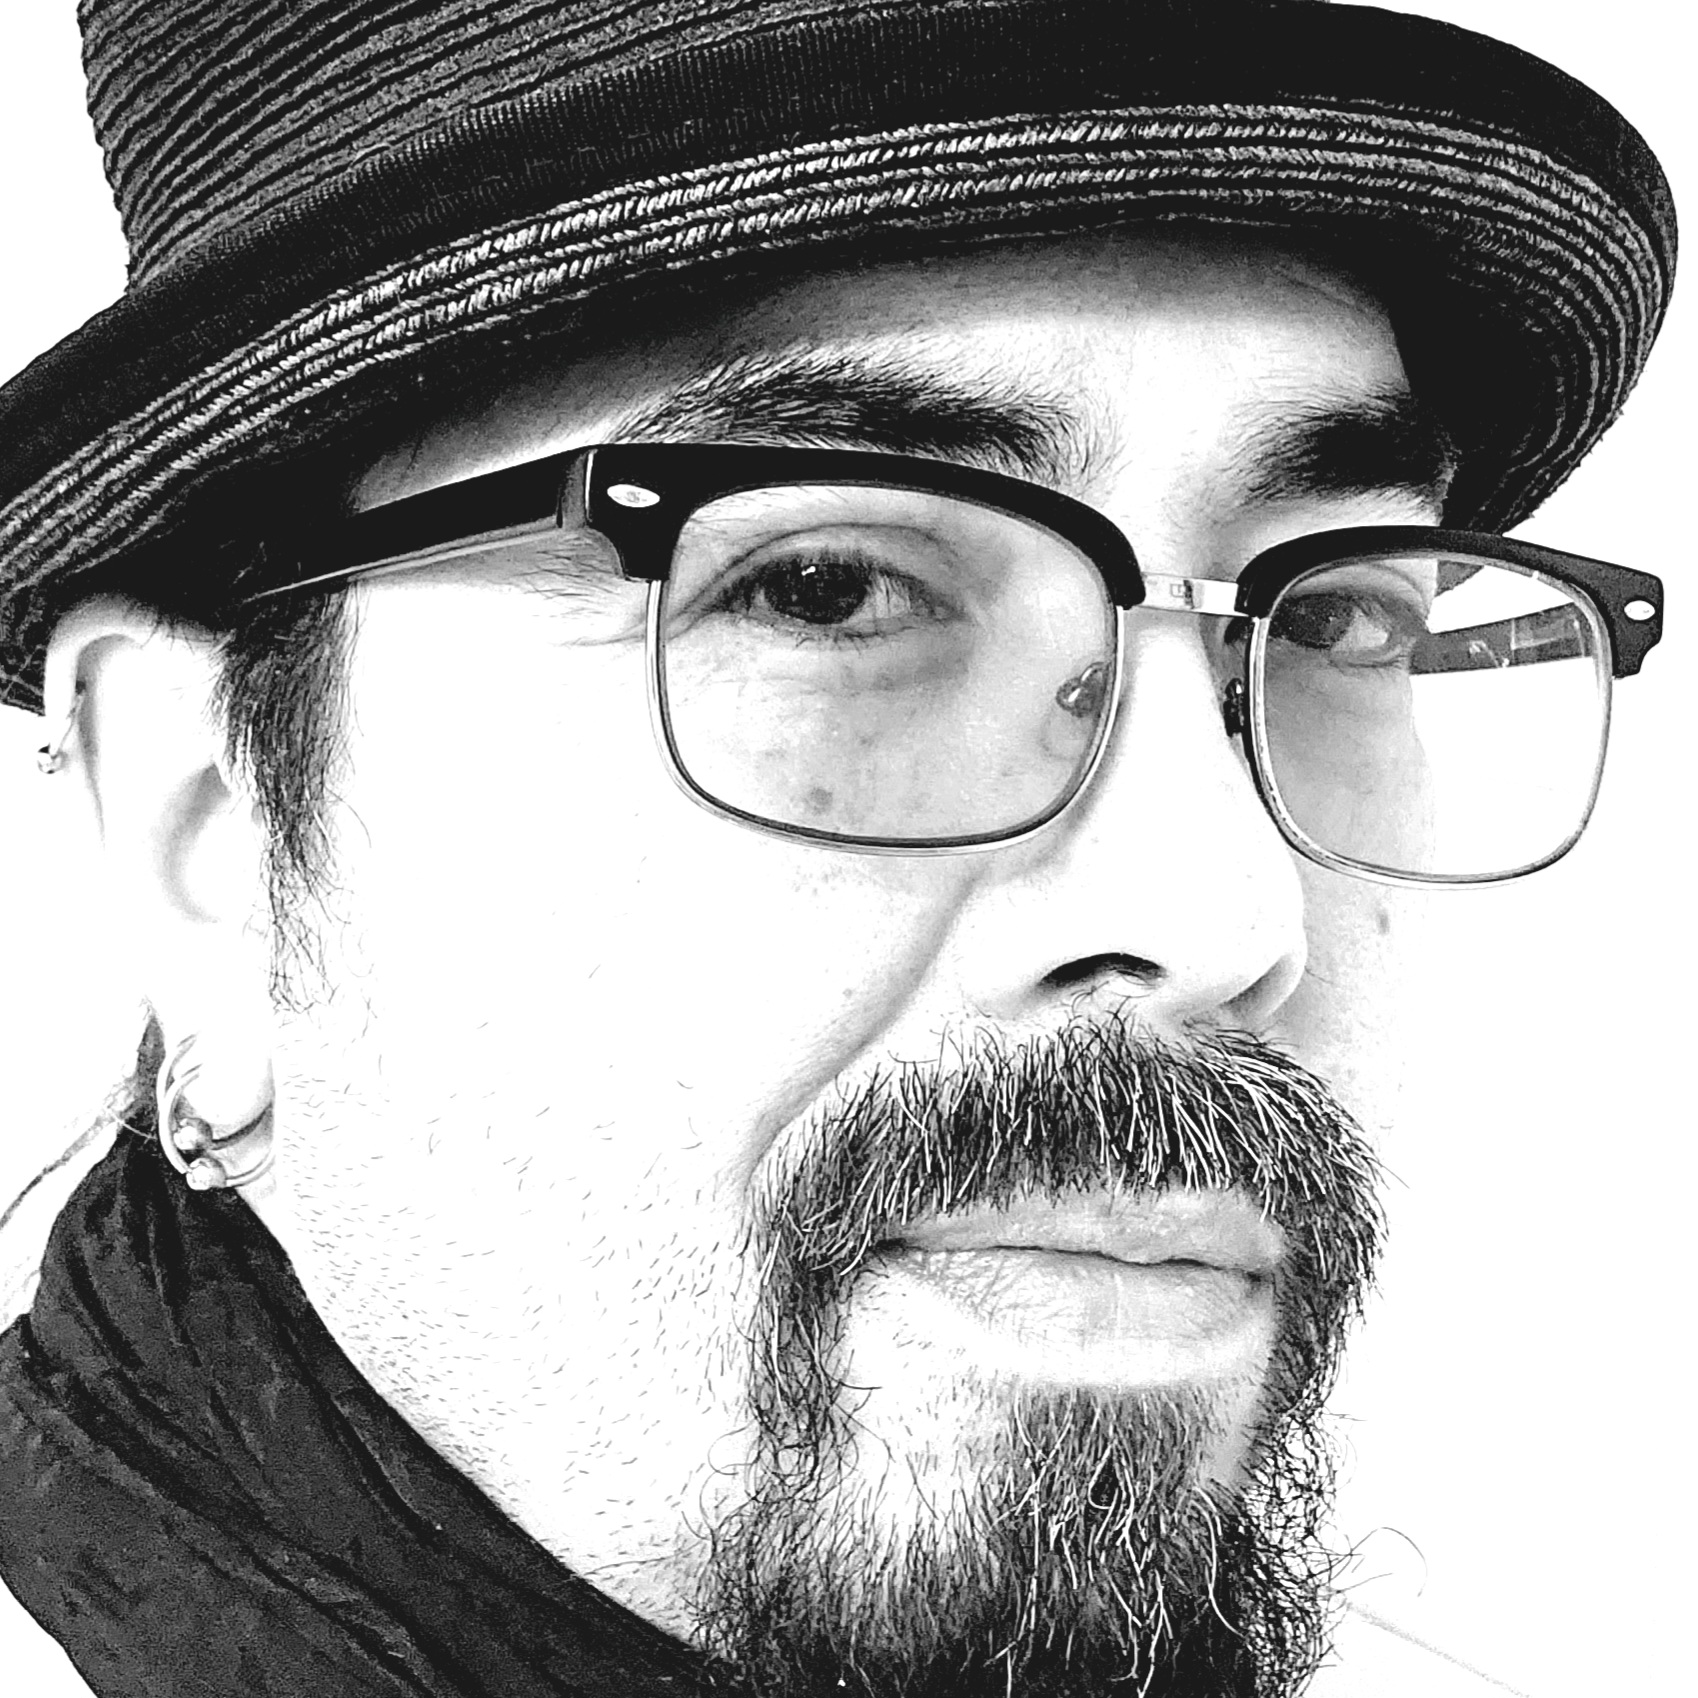 Michael Gamble - Black and white close up portrait of man wearing a hat, and glasses. He has a mustache and goatee.